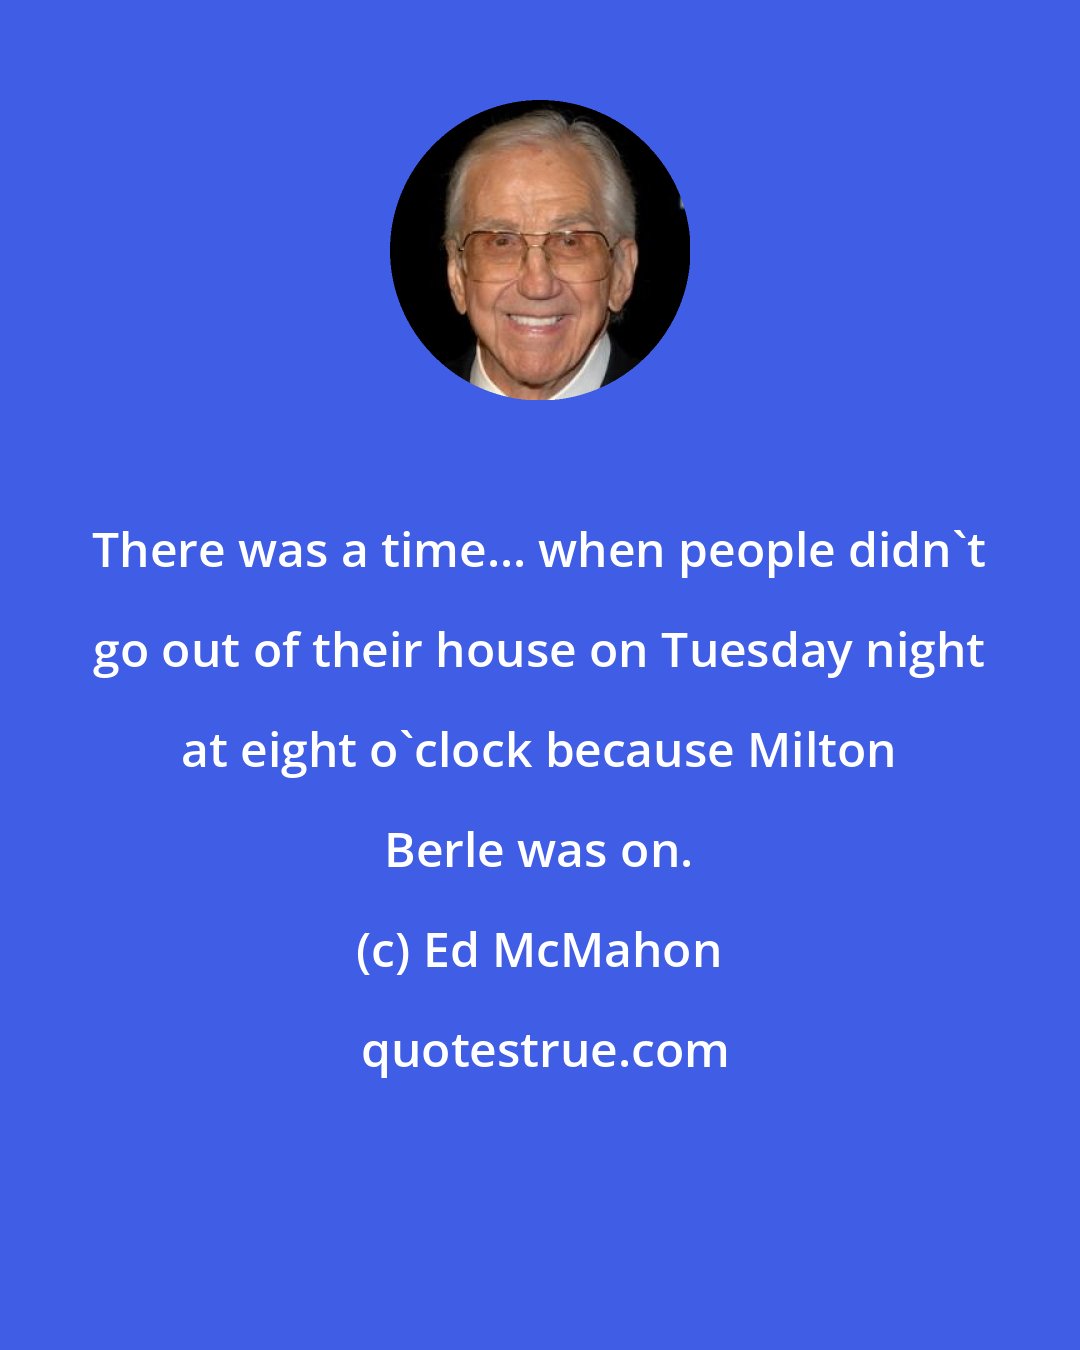 Ed McMahon: There was a time... when people didn't go out of their house on Tuesday night at eight o'clock because Milton Berle was on.